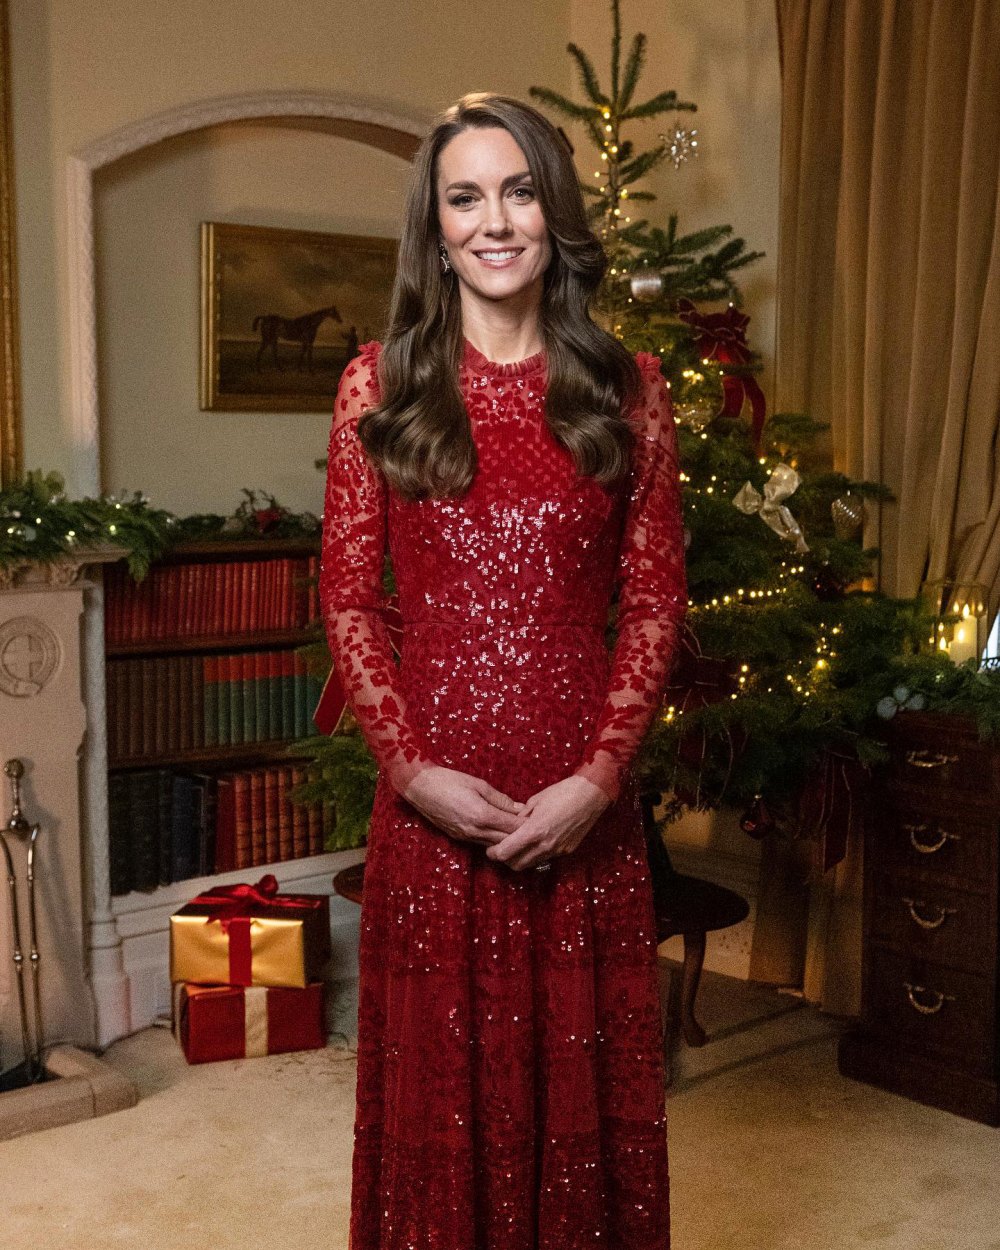 Princess Kate Wears Festive Red Gown While Promoting Holiday Concert 'Royal Carols: Together at Christmas'